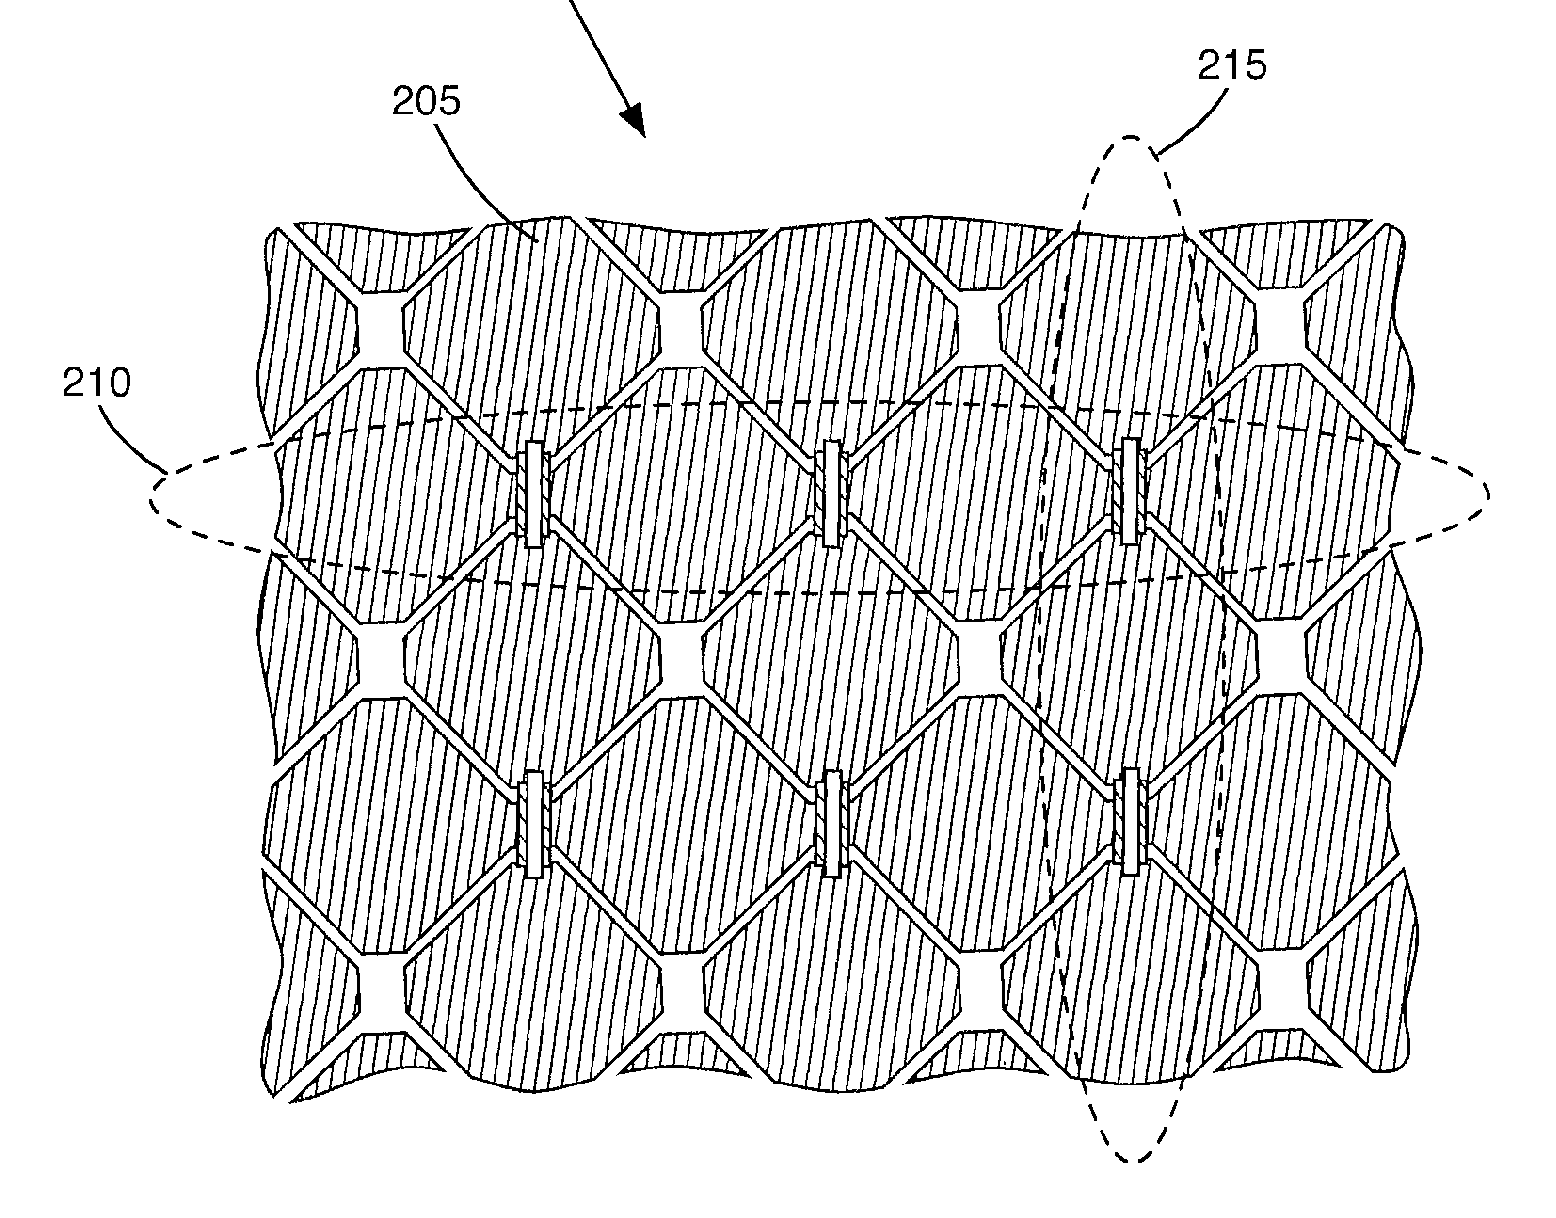 Projected capacitive touch sensor with asymmetric bridge pattern